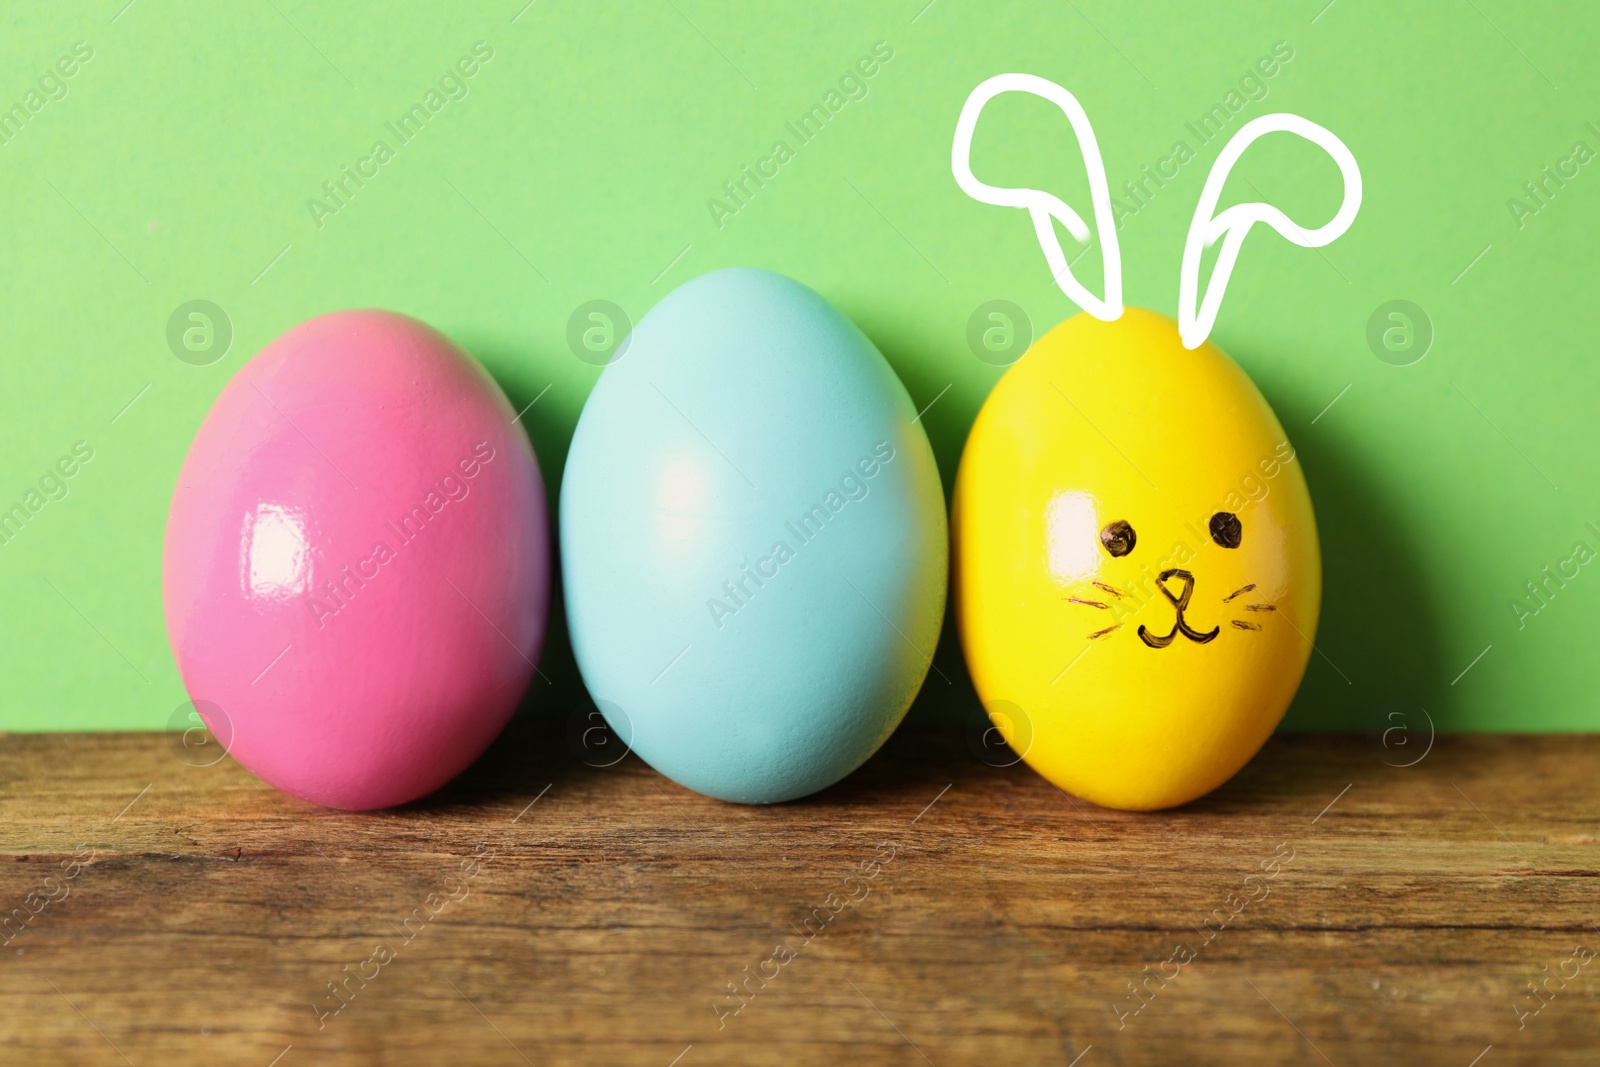 Image of Yellow egg with drawn face and ears as Easter bunny among others on wooden table against green background